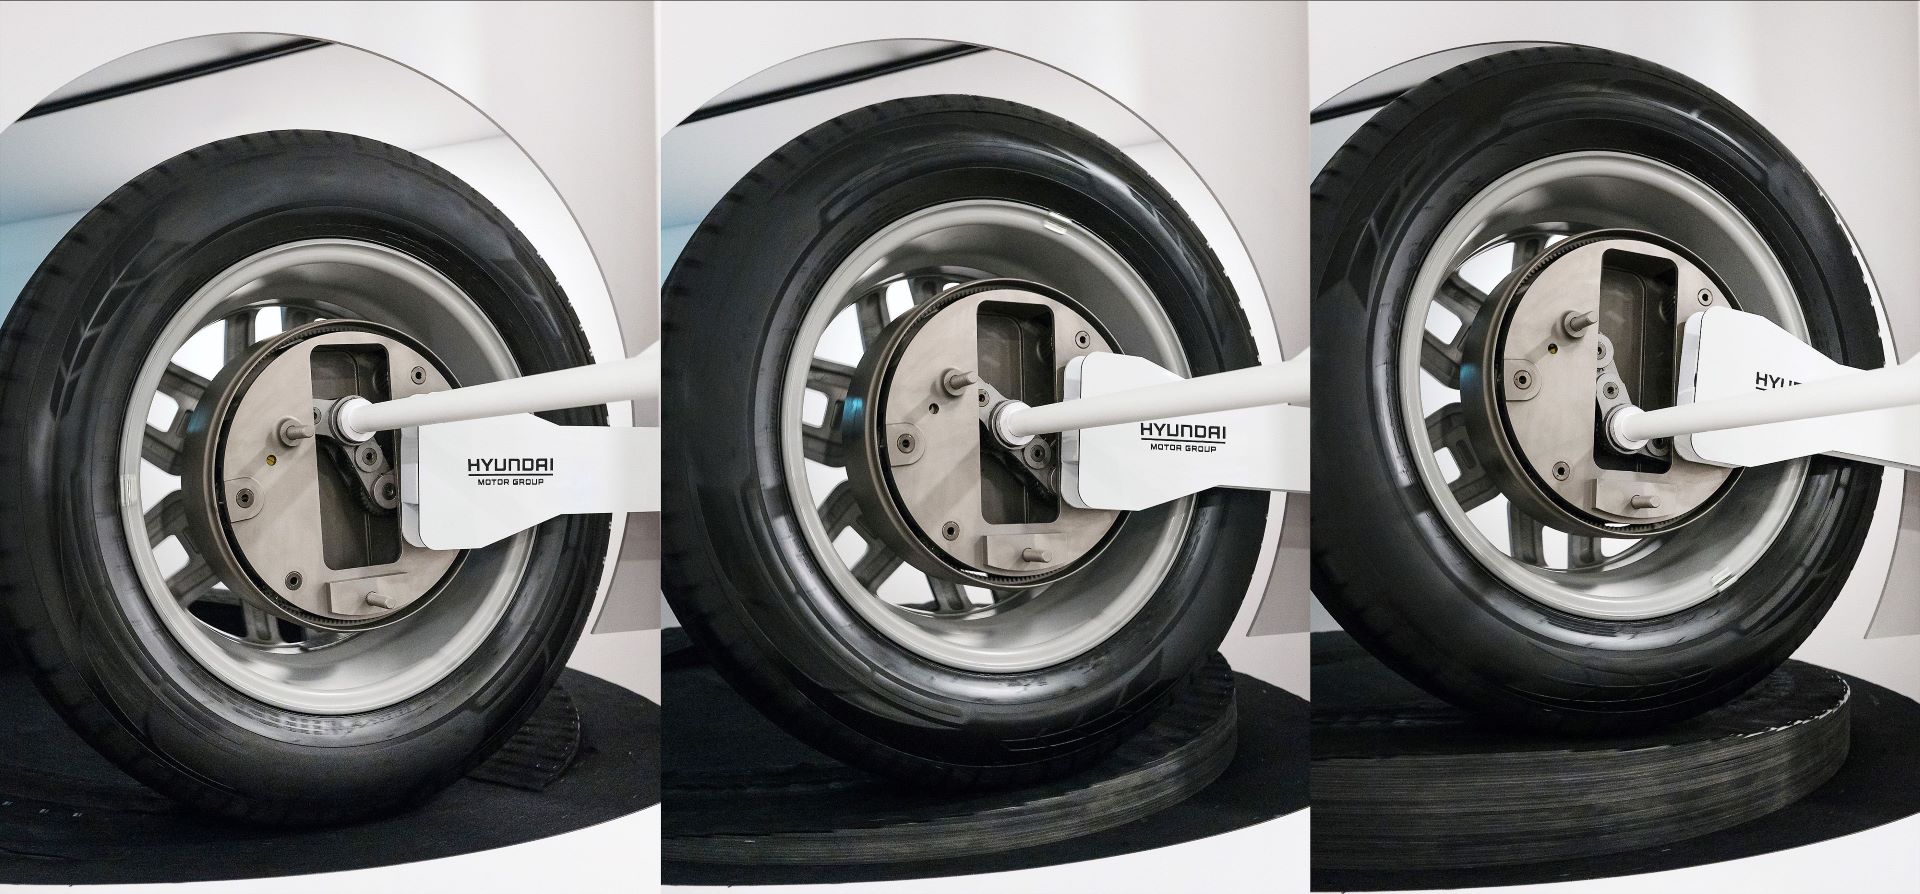 Hyundai Motor Group’s ‘Uni Wheel’ frees up more space in electric vehicles